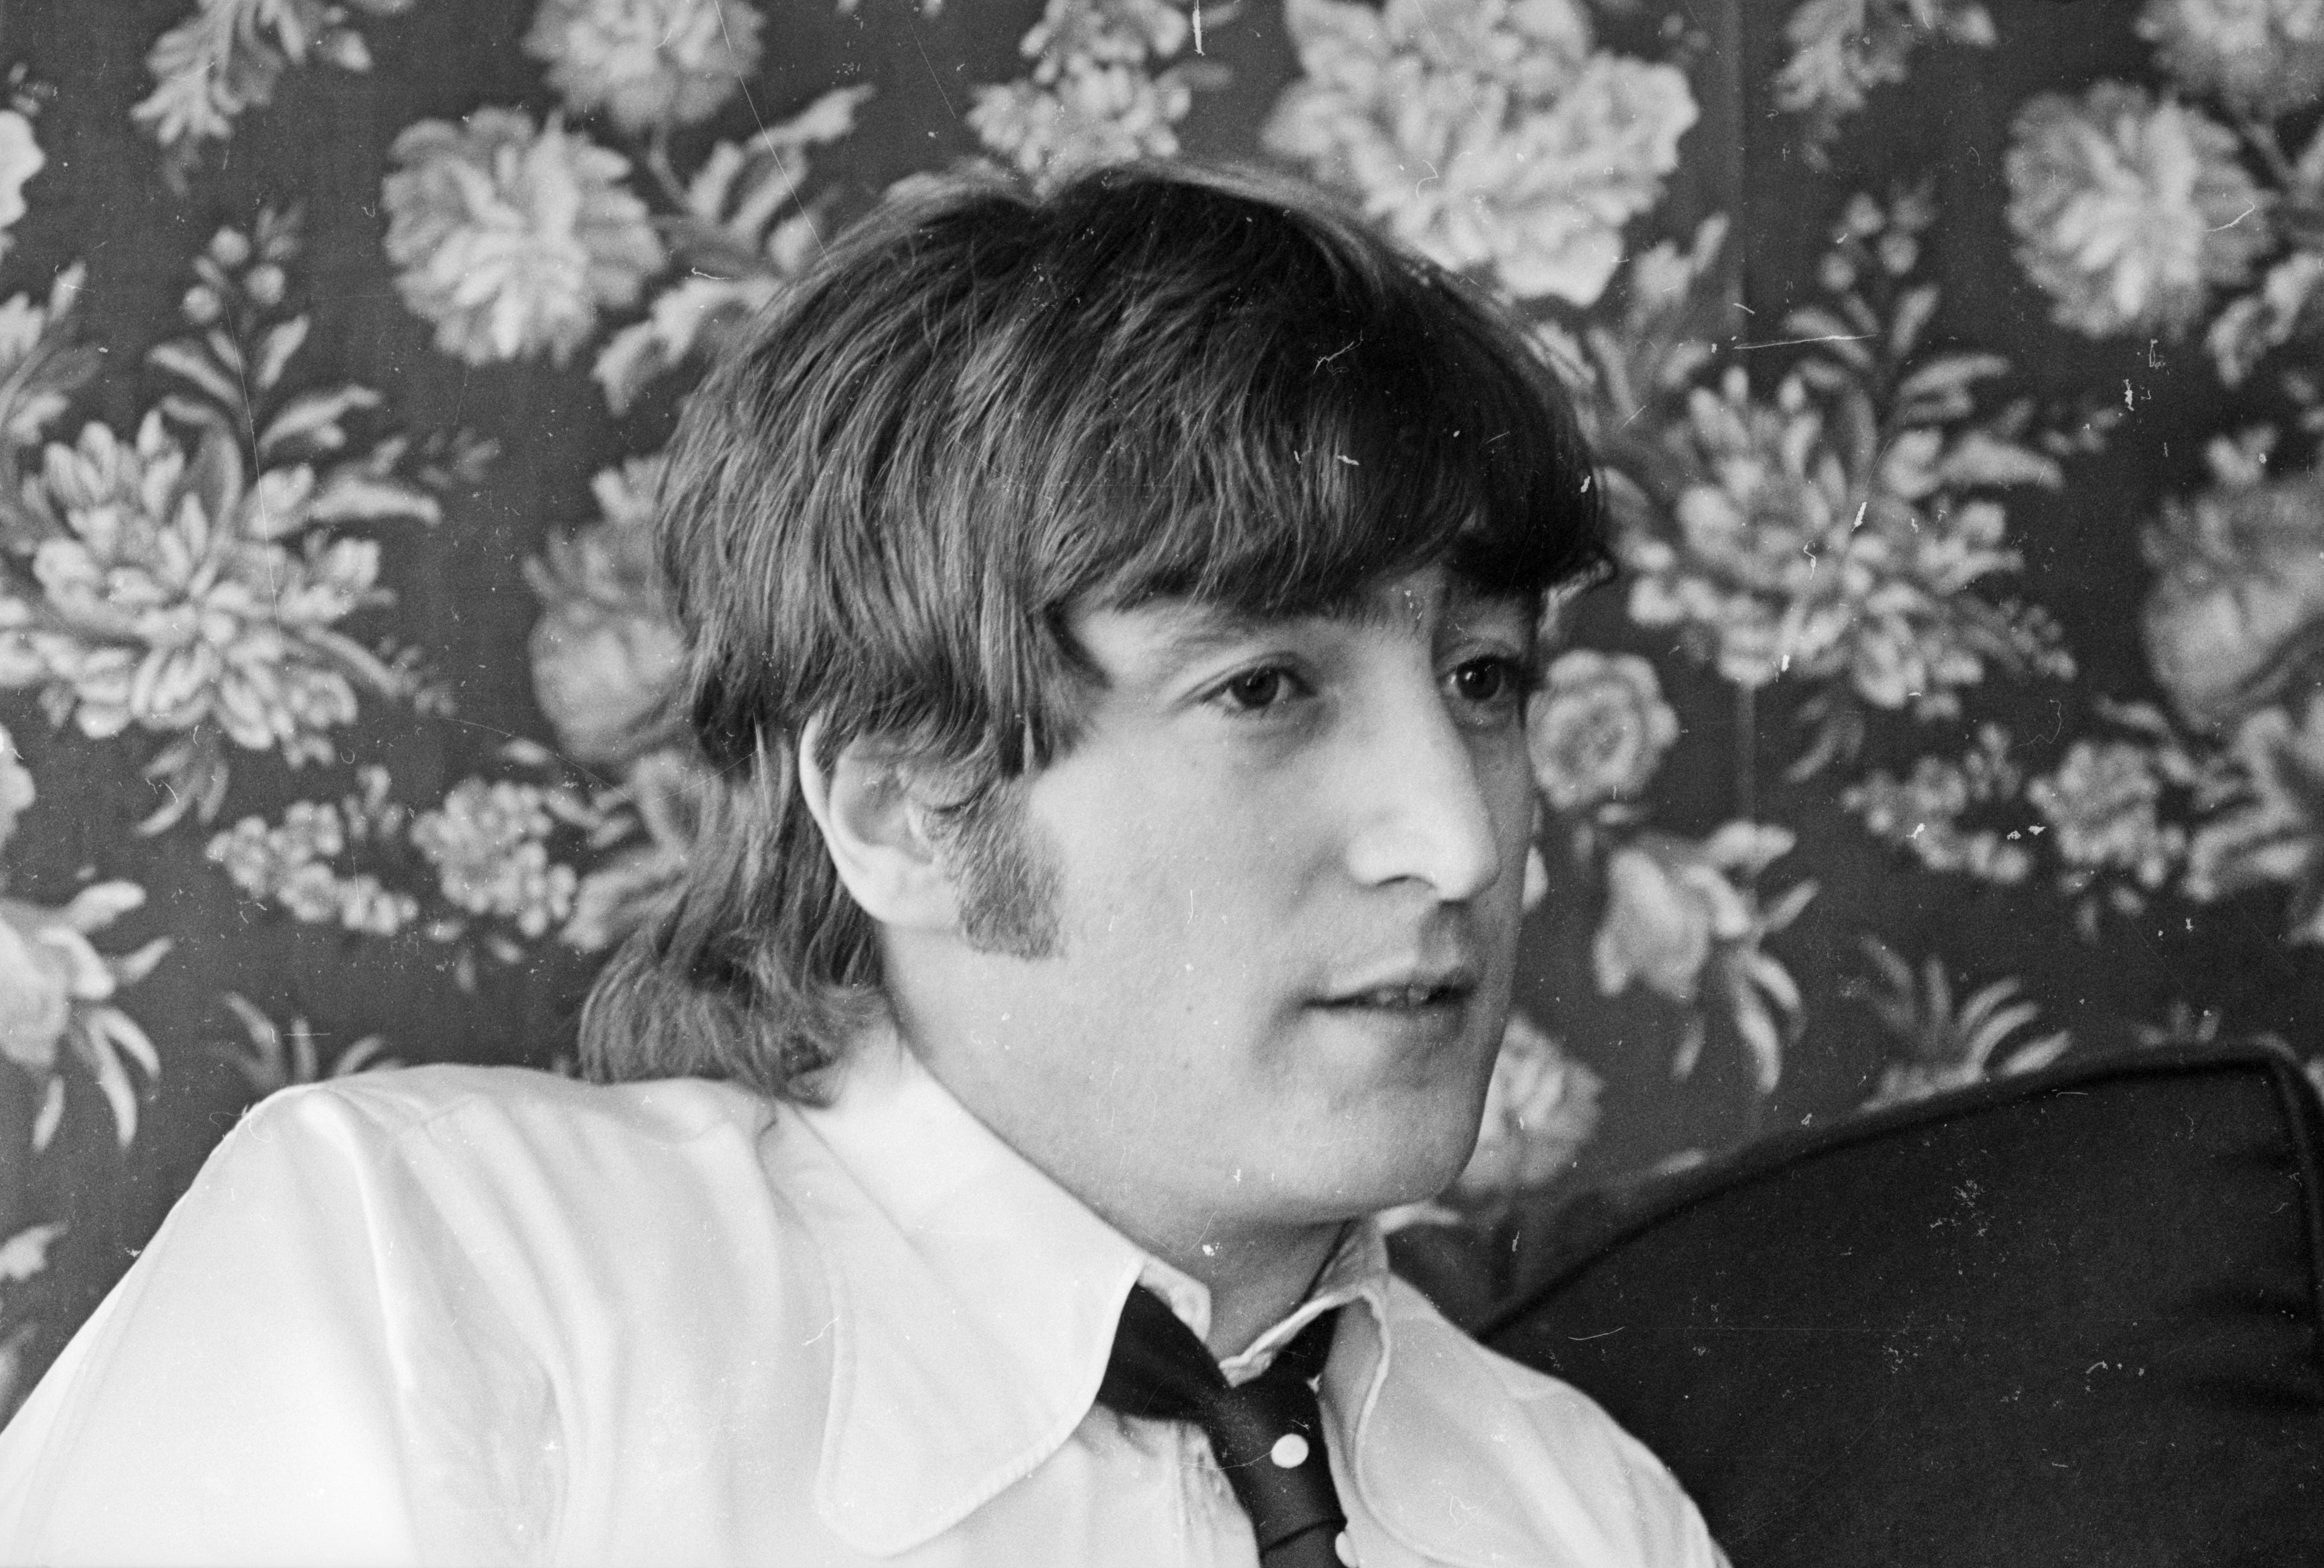 John Lennon Compared Being in The Beatles to Getting Crucified